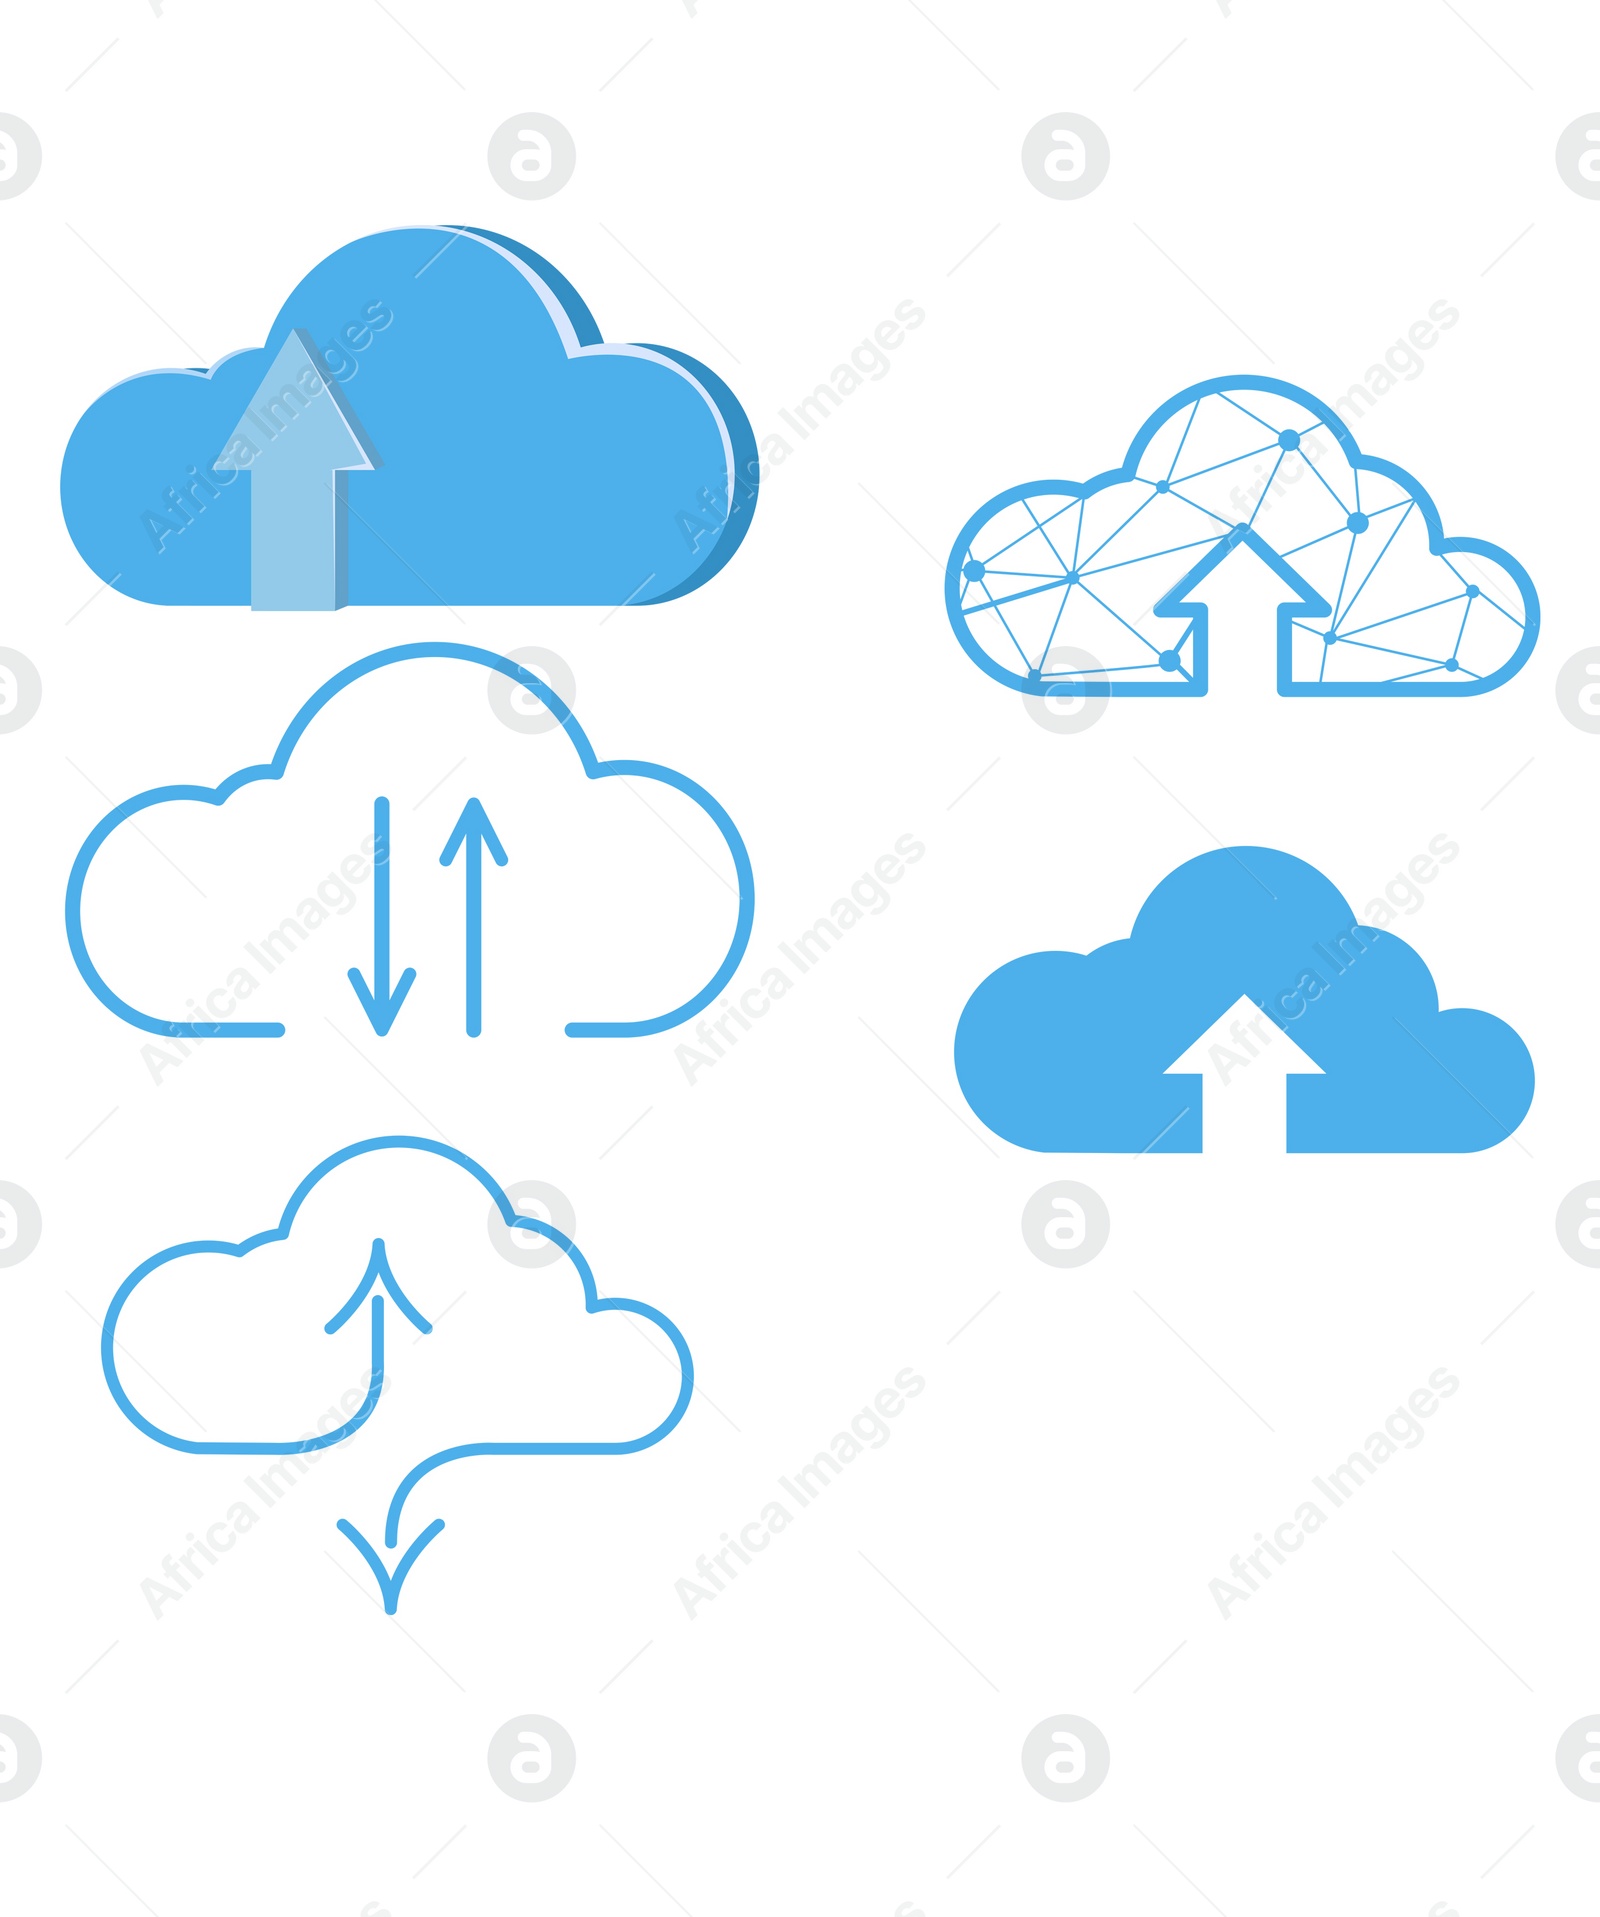 Illustration of Web hosting service. Cloud with arrows illustrations on white background